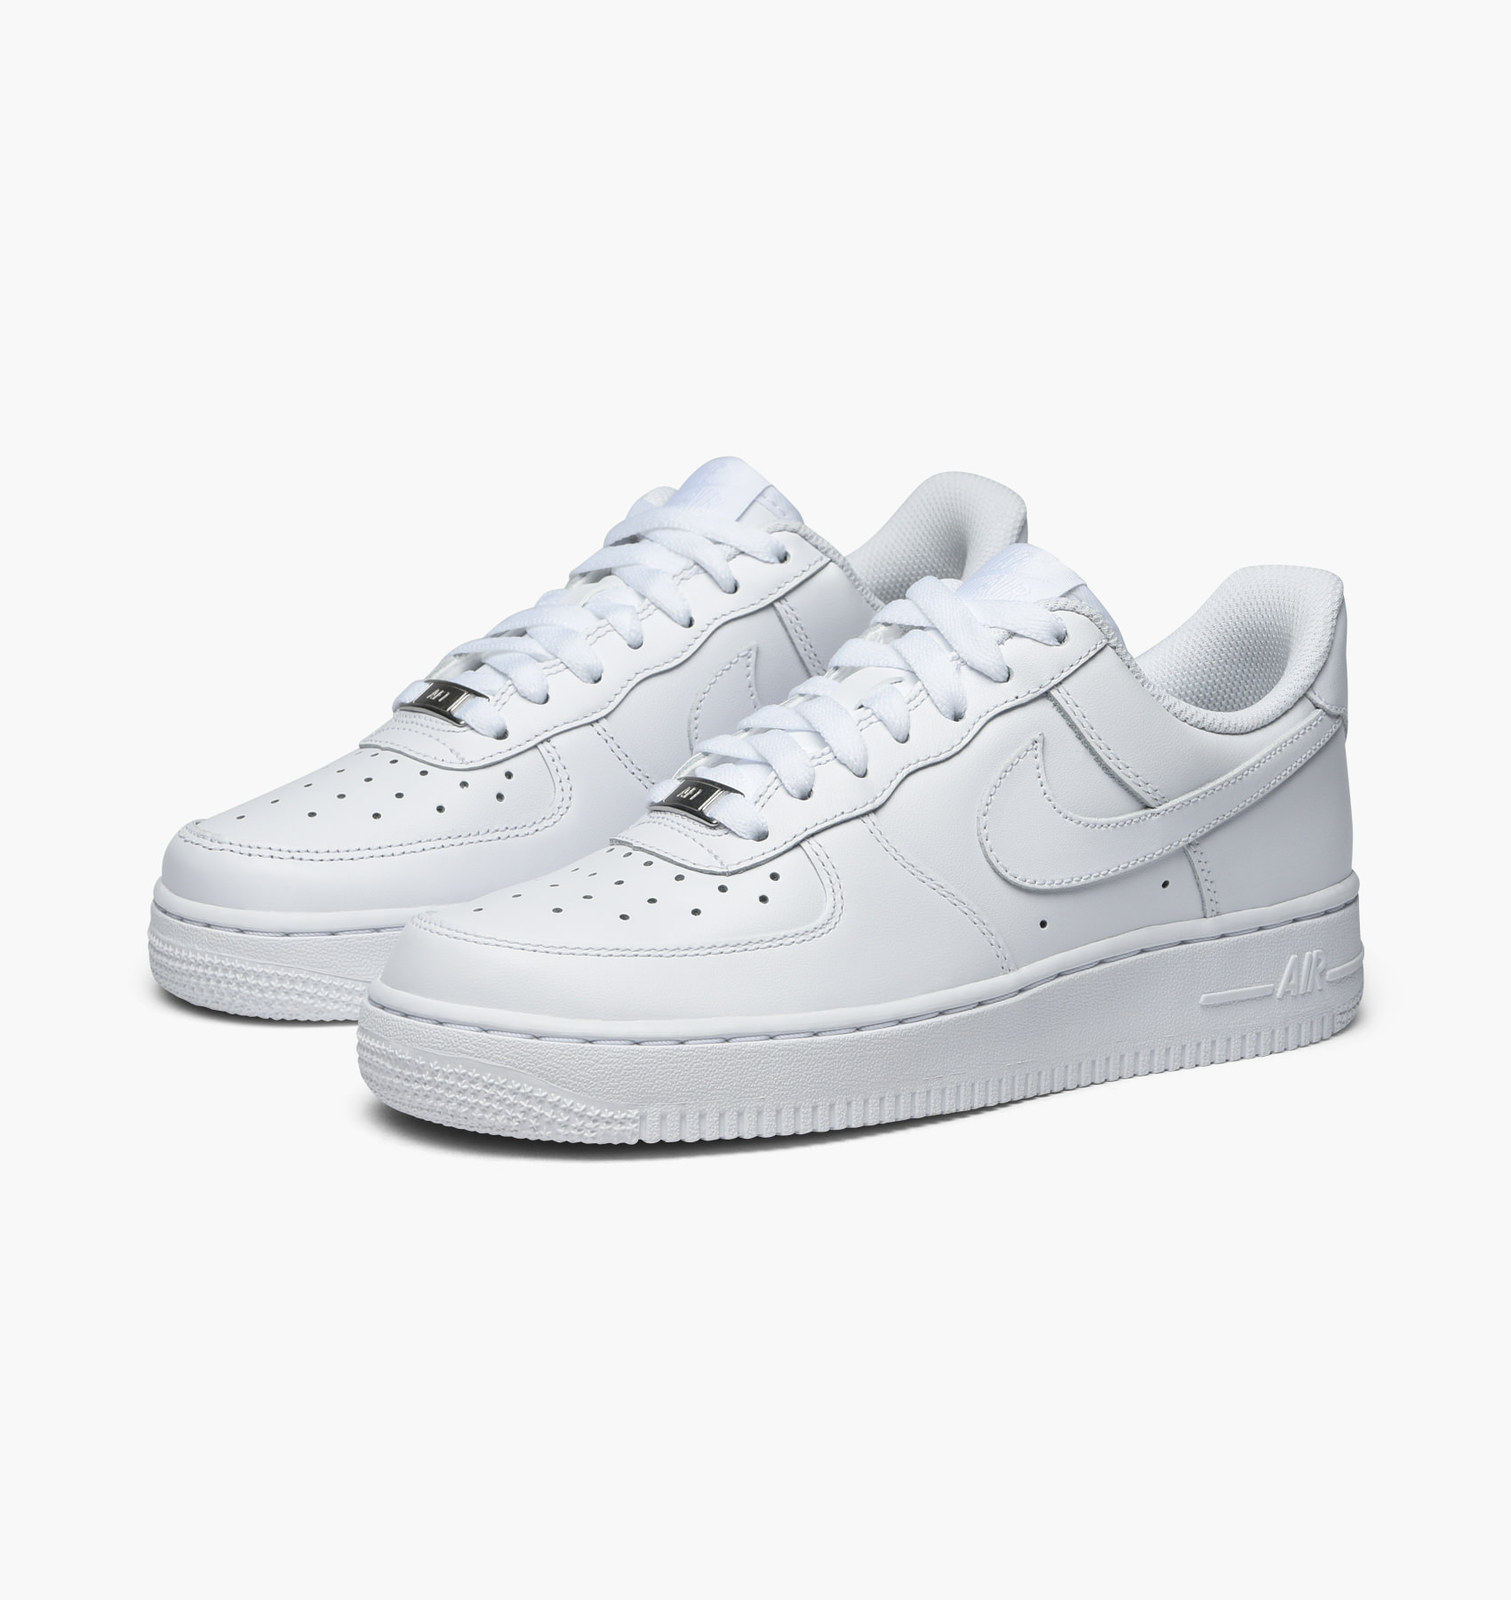 air force ones size 6 womens